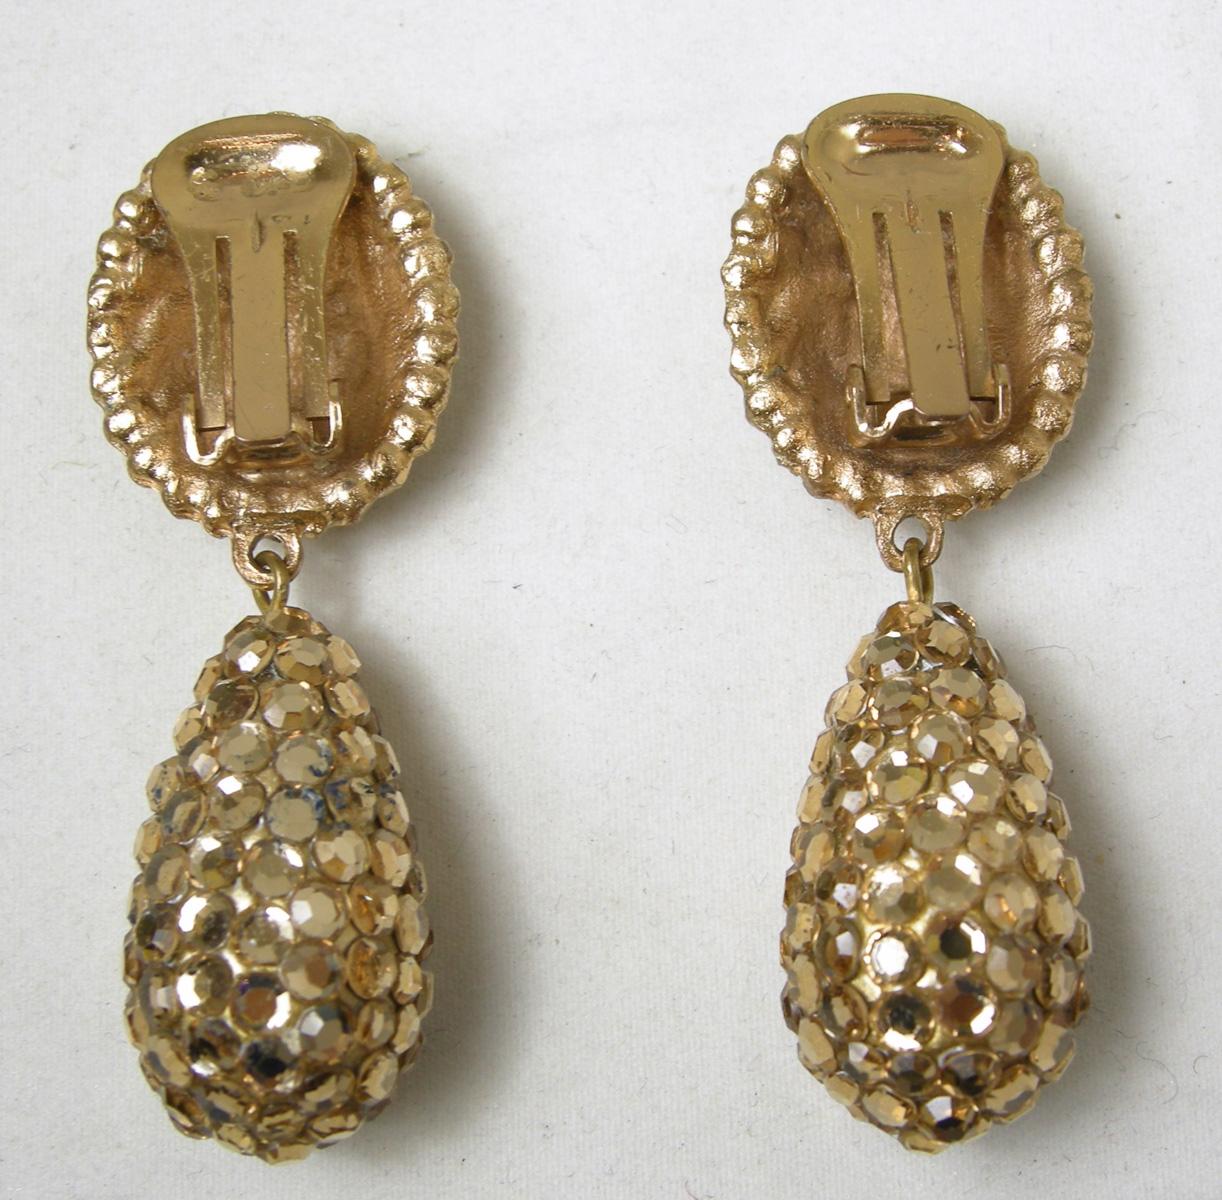 When I first saw these clip earrings, I thought they were made by Richard Kerr.  It has the flat back gold tone rhinestones he was famous for.  These clip earrings have a round disk top with a large dangling drop.  It measures 2-1/4” long x 7/8”